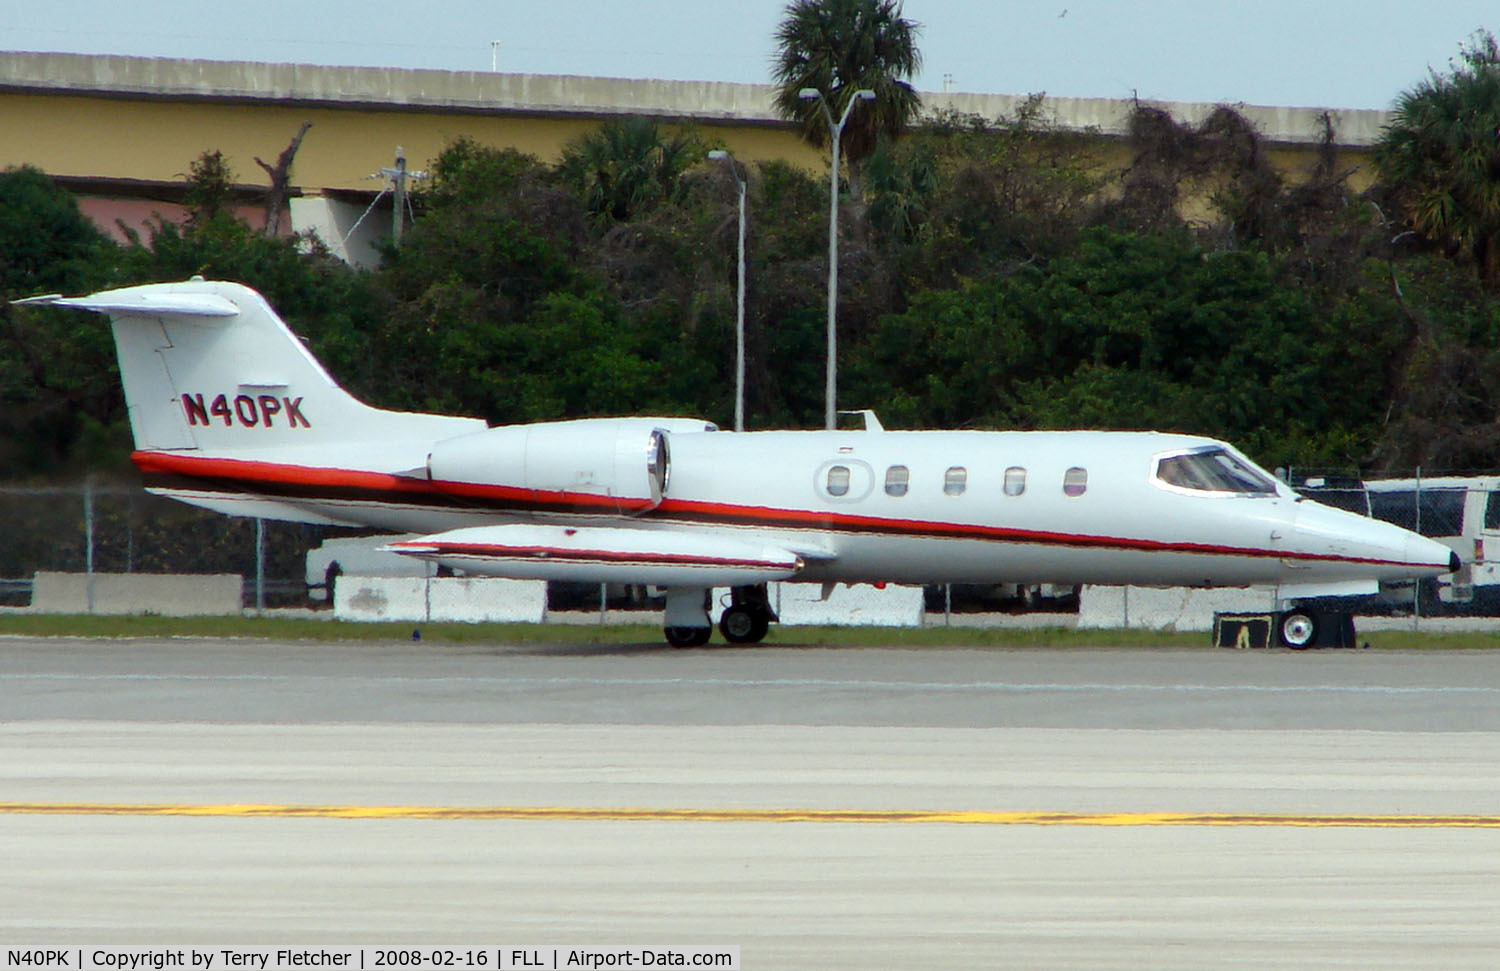 N40PK, 1979 Gates Learjet Corp. 35A C/N 260, Learjet 35A waits clearance to depart FLL in the midday heat